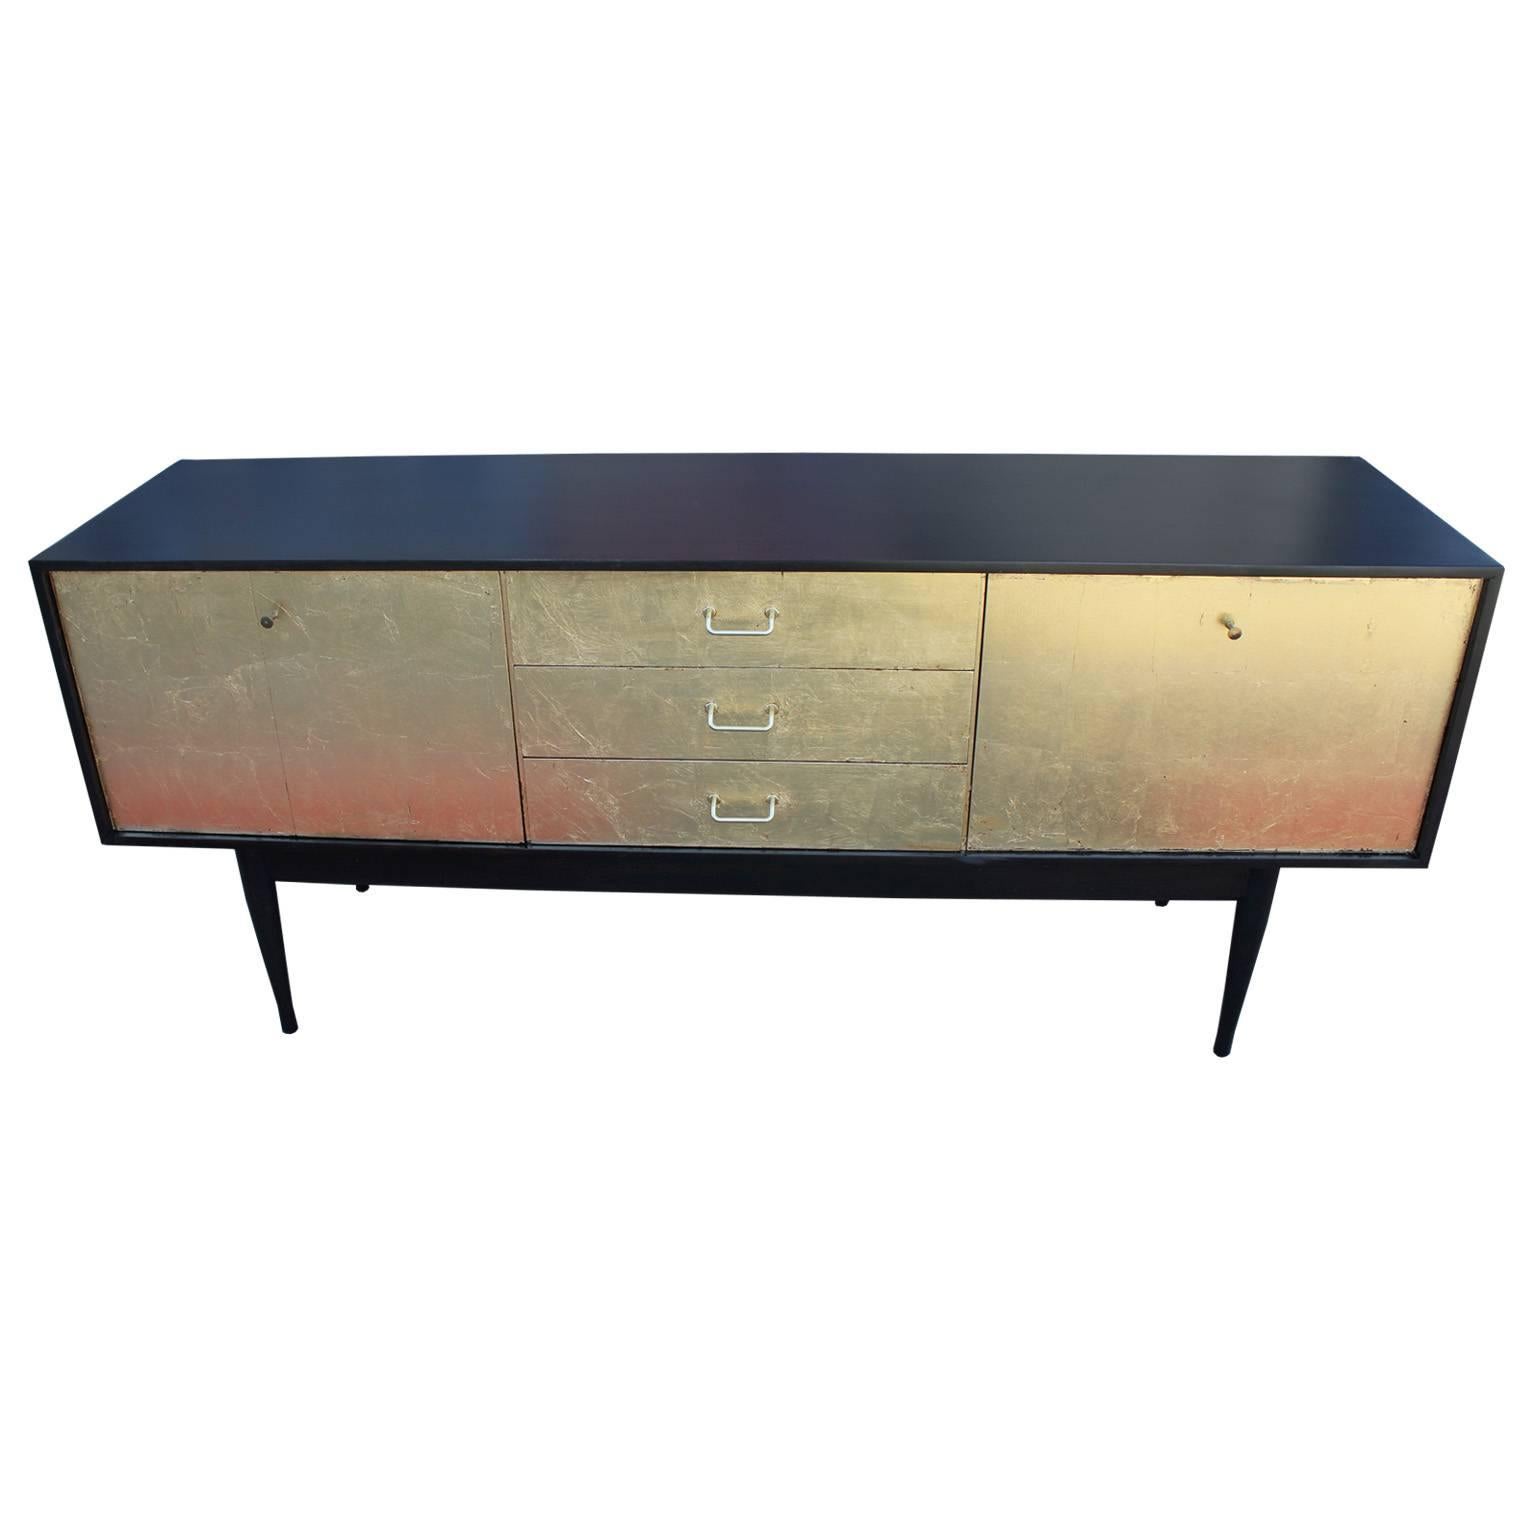 Glamorous sideboard freshly finished restored in an ebonized stained shell with a bold gold leafed front. The left door is a bi-fold while right door drops open a serving platform. Three drawers finish off the center. The sideboard is stunning from